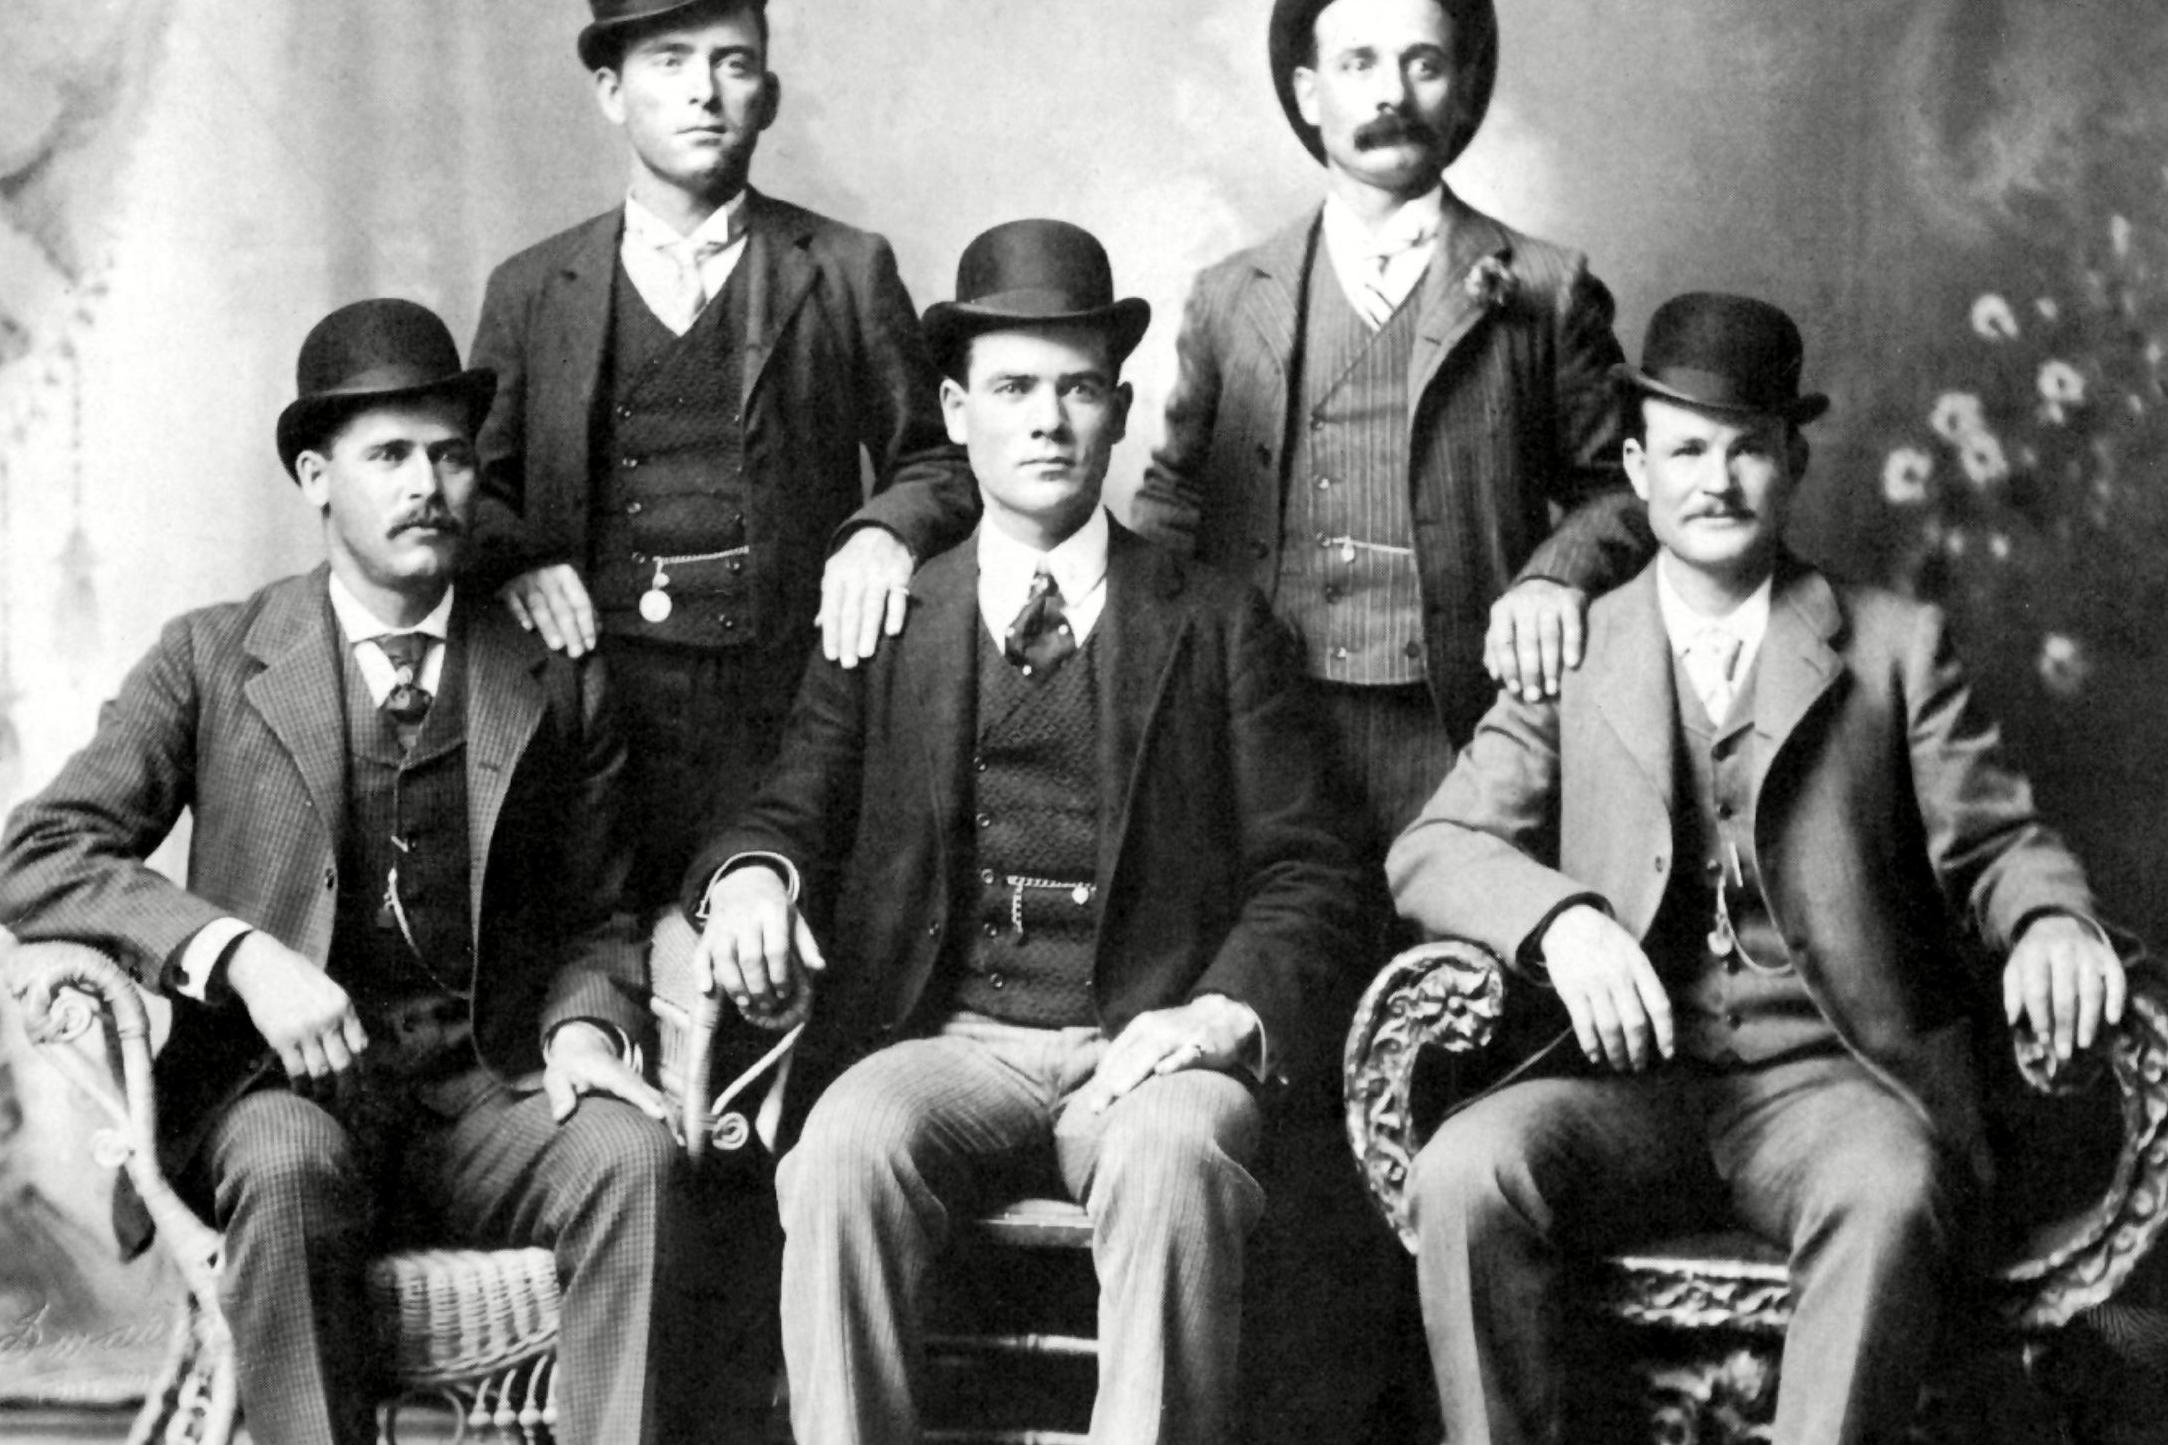 Butch Cassidy (real name Robert LeRoy Parker) is seated far right while the Sundance Kid (Harry Longabaugh) is seated far left, in 1901